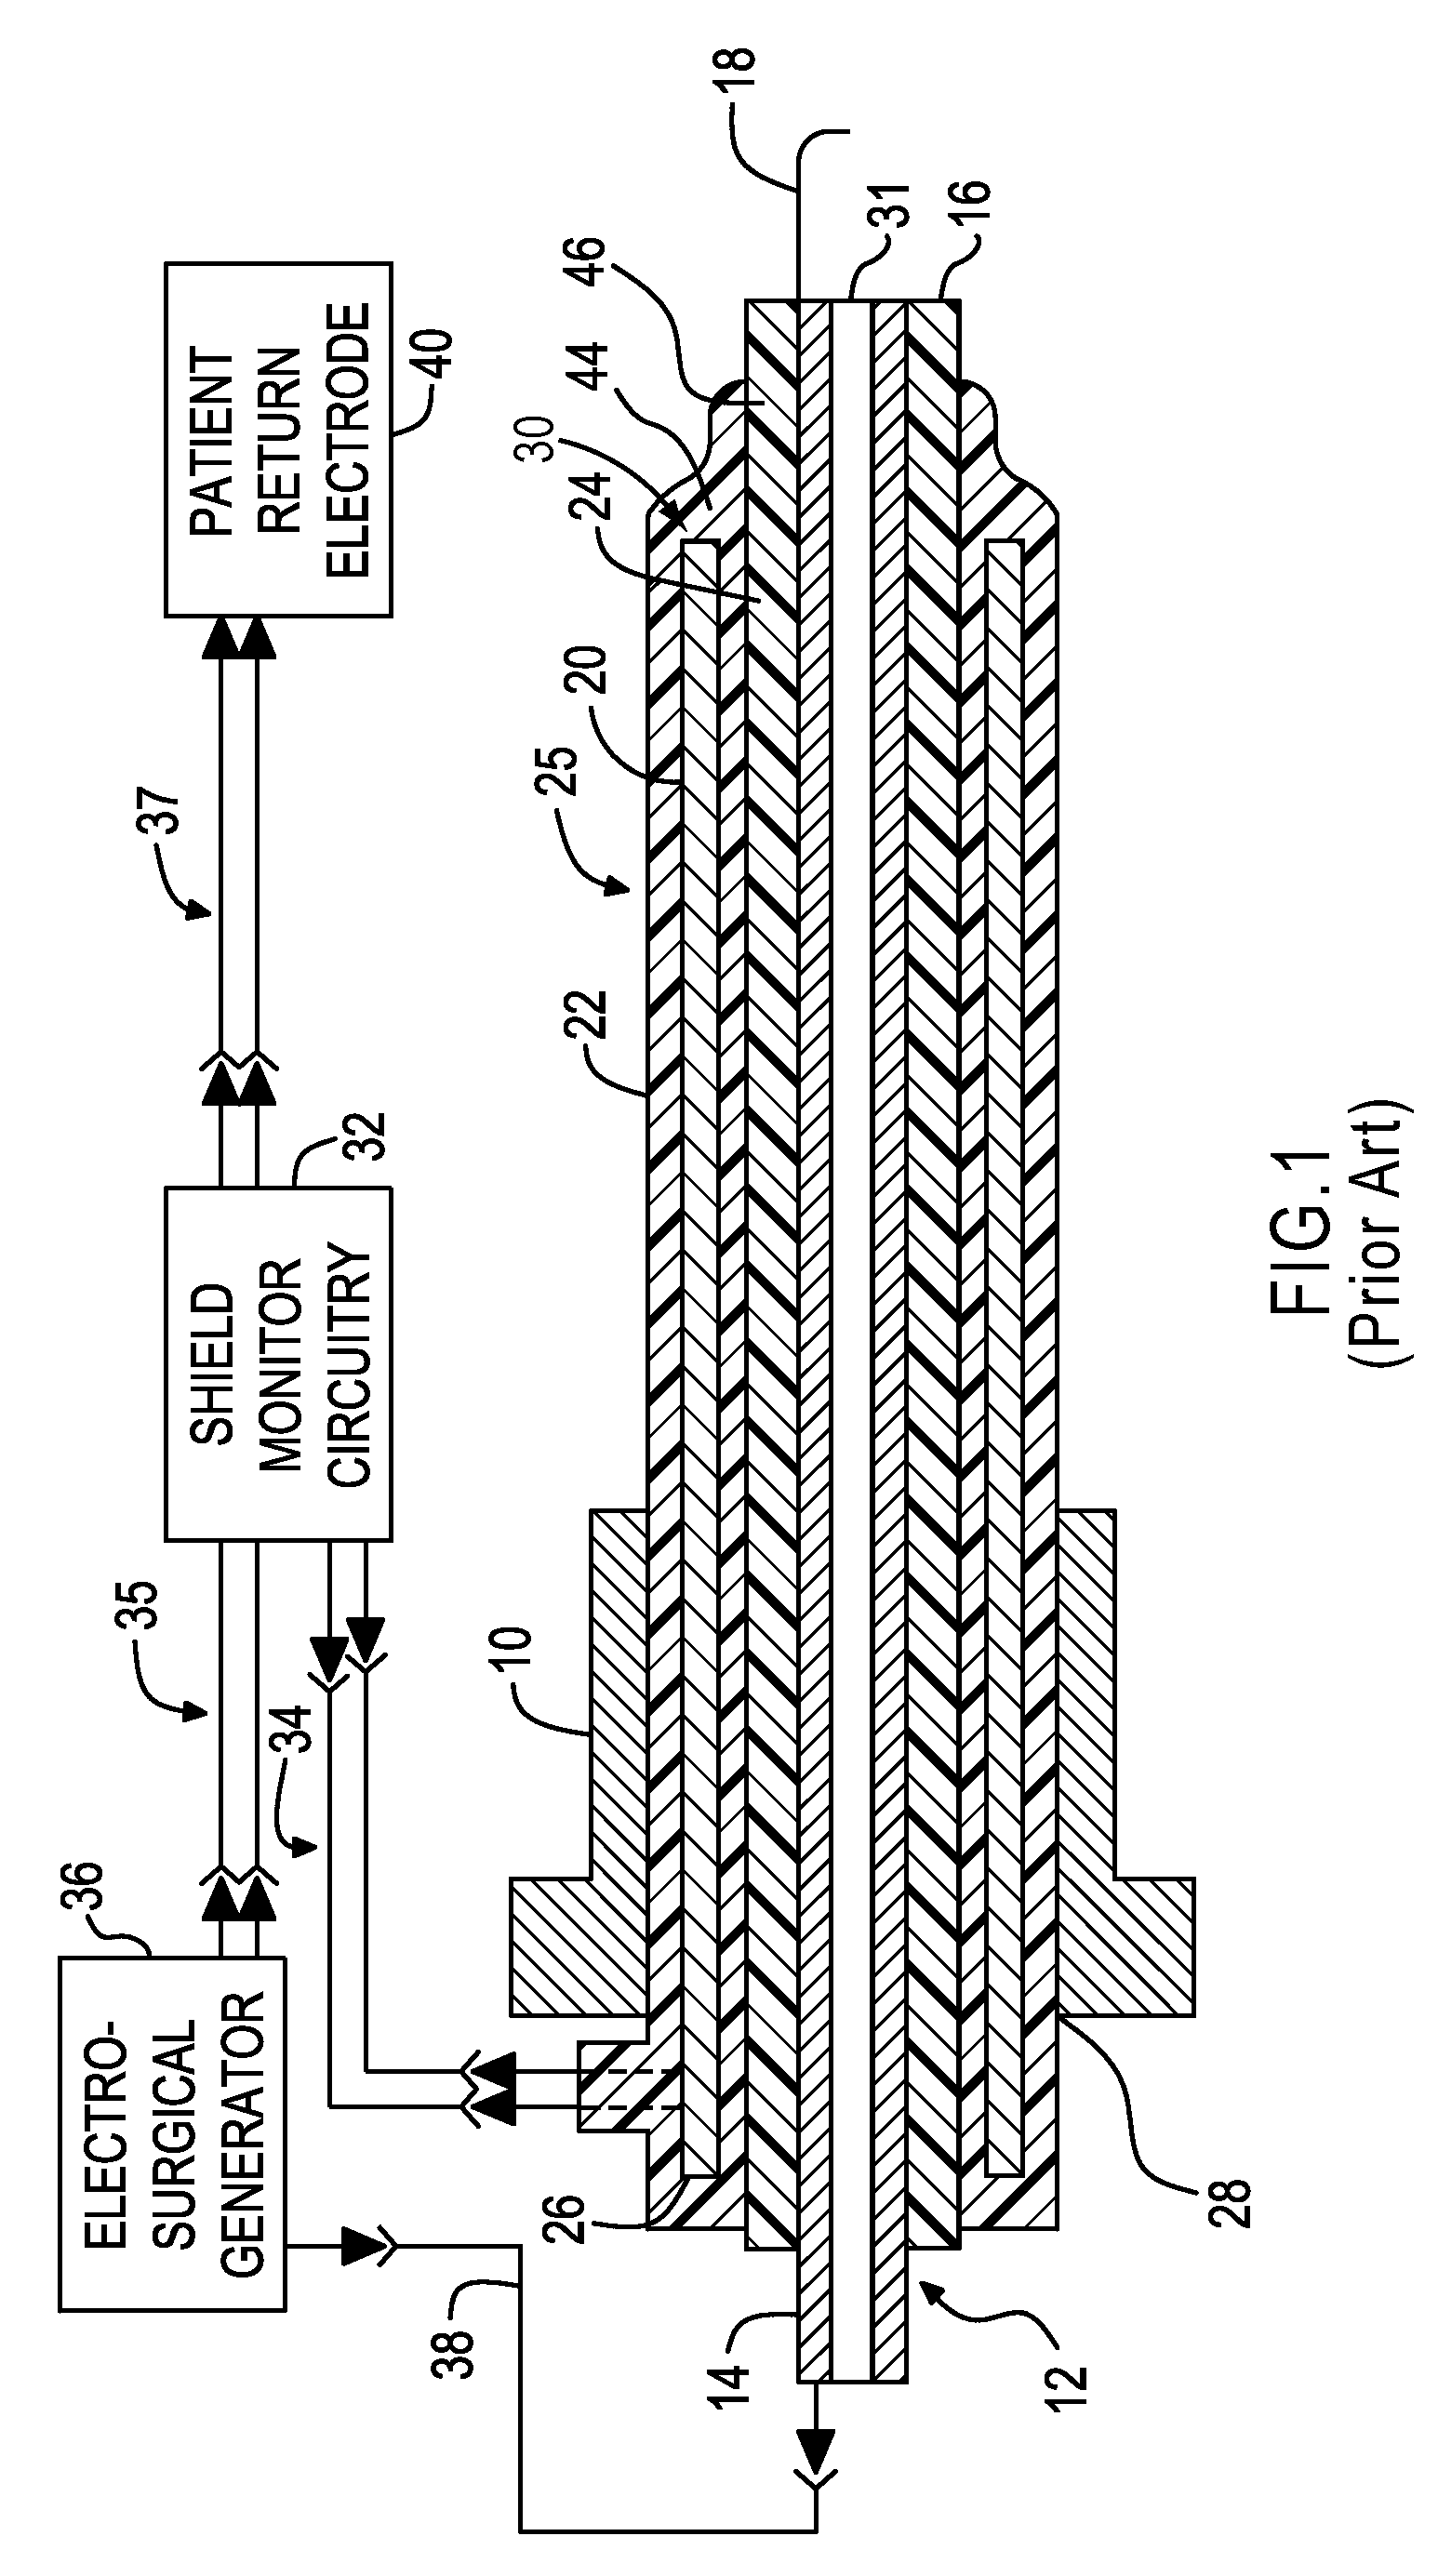 Multiple parameter fault detection in electrosurgical instrument shields